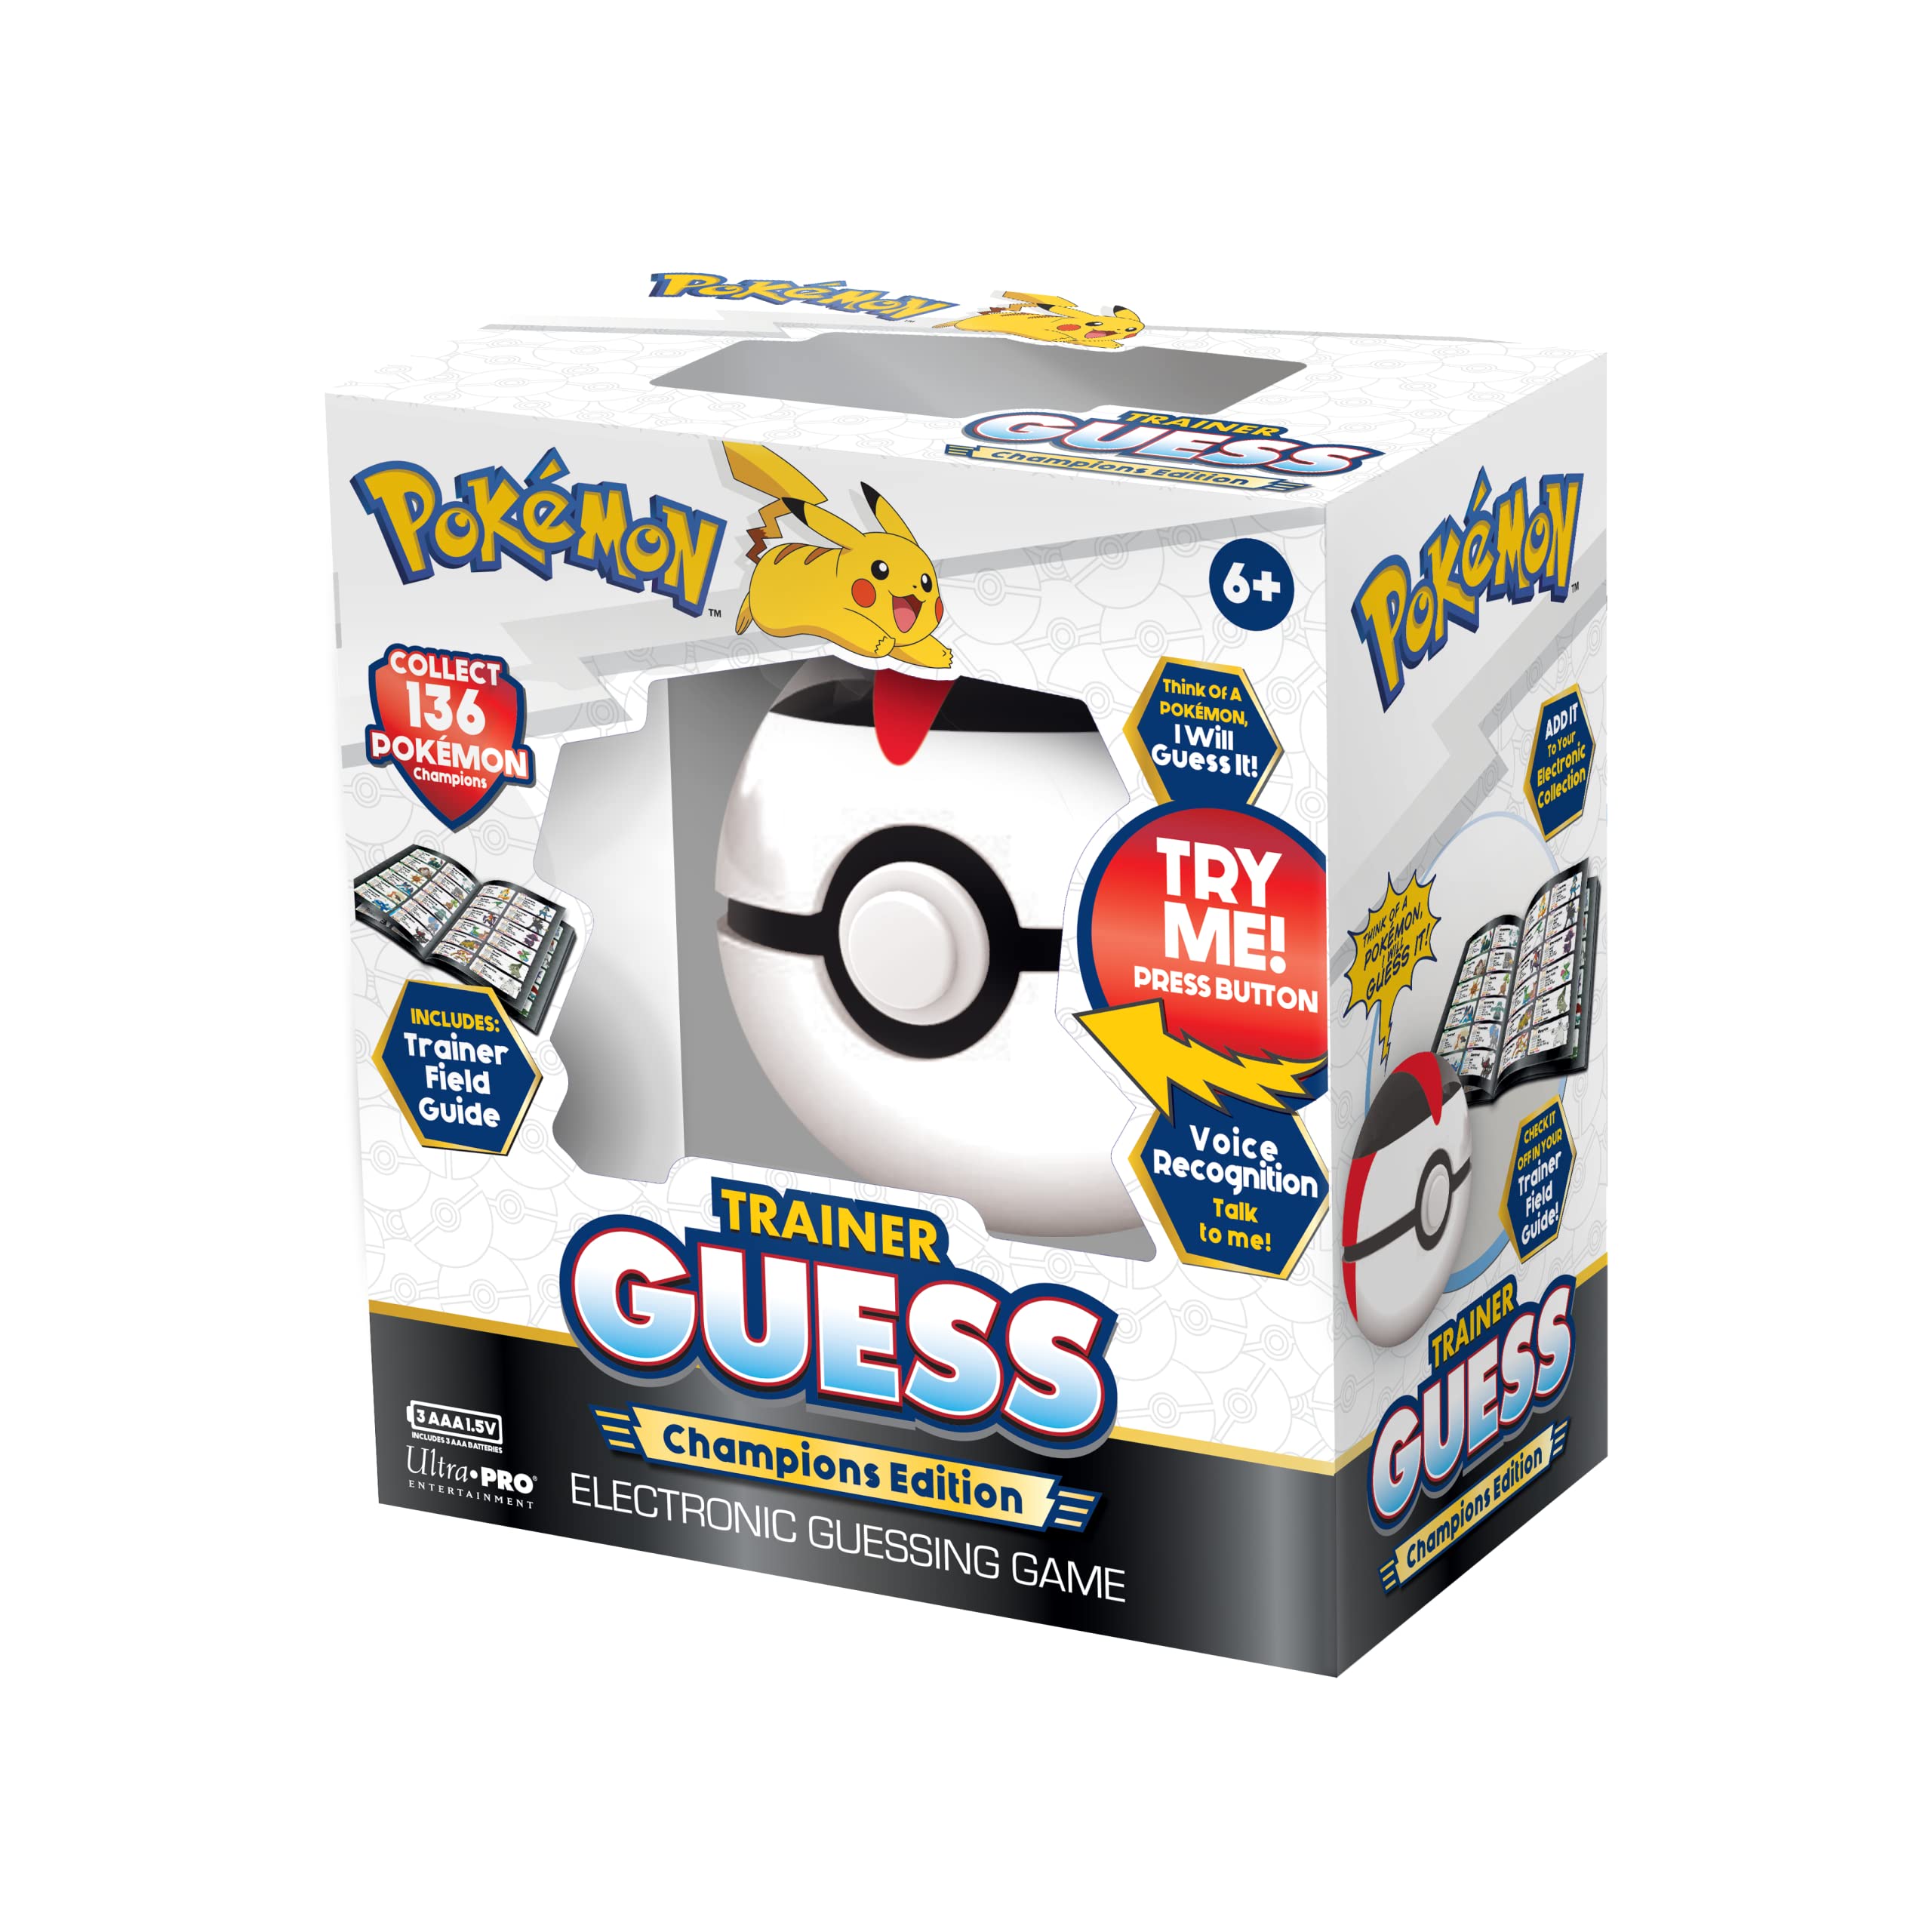 Pokemon Trainer Guess - Champion Pokemon Toy, I Will Guess It! Electronic Voice Recognition Guessing Brain Game Pokemon Go Digital Travel Board Games Toys